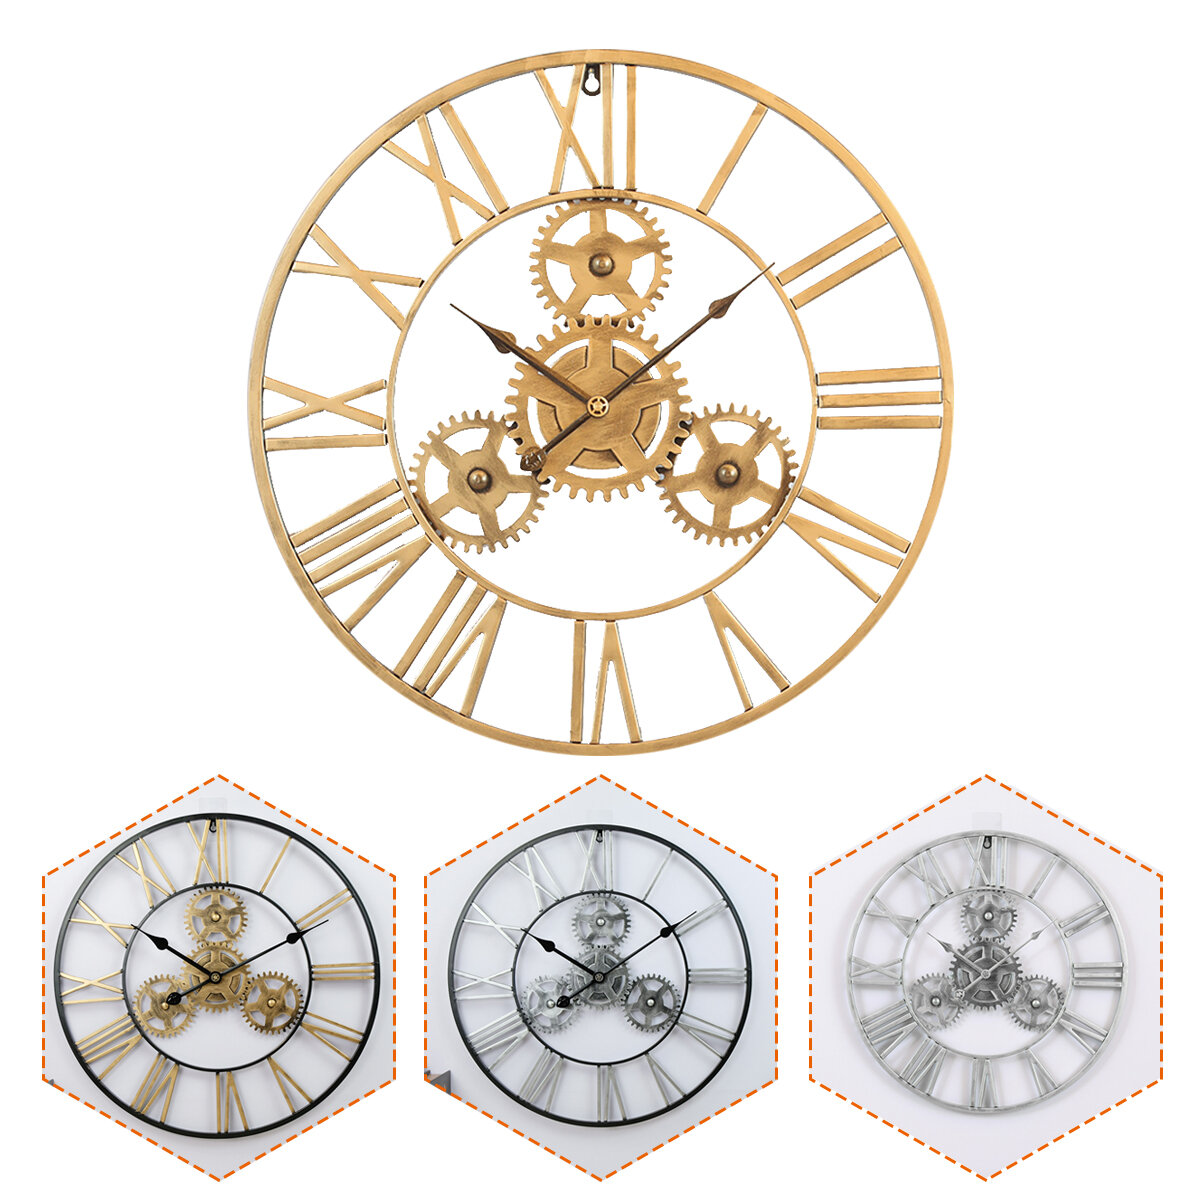 

60CM Large Vintage Gear Art Wall Clock Big Roman Numeral Giant Round Open Face